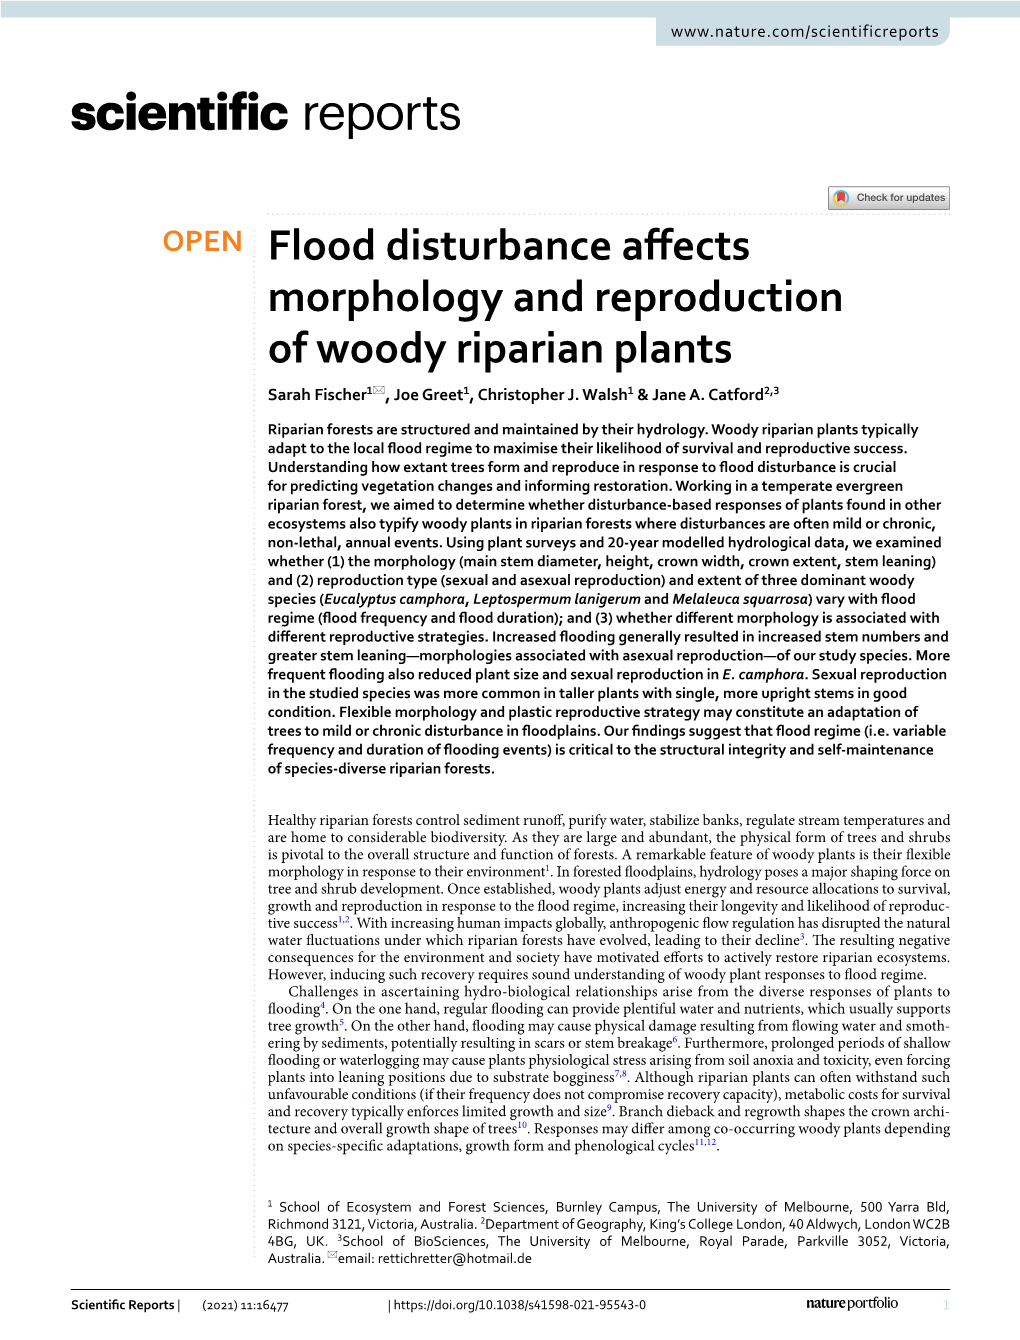 Flood Disturbance Affects Morphology and Reproduction of Woody Riparian